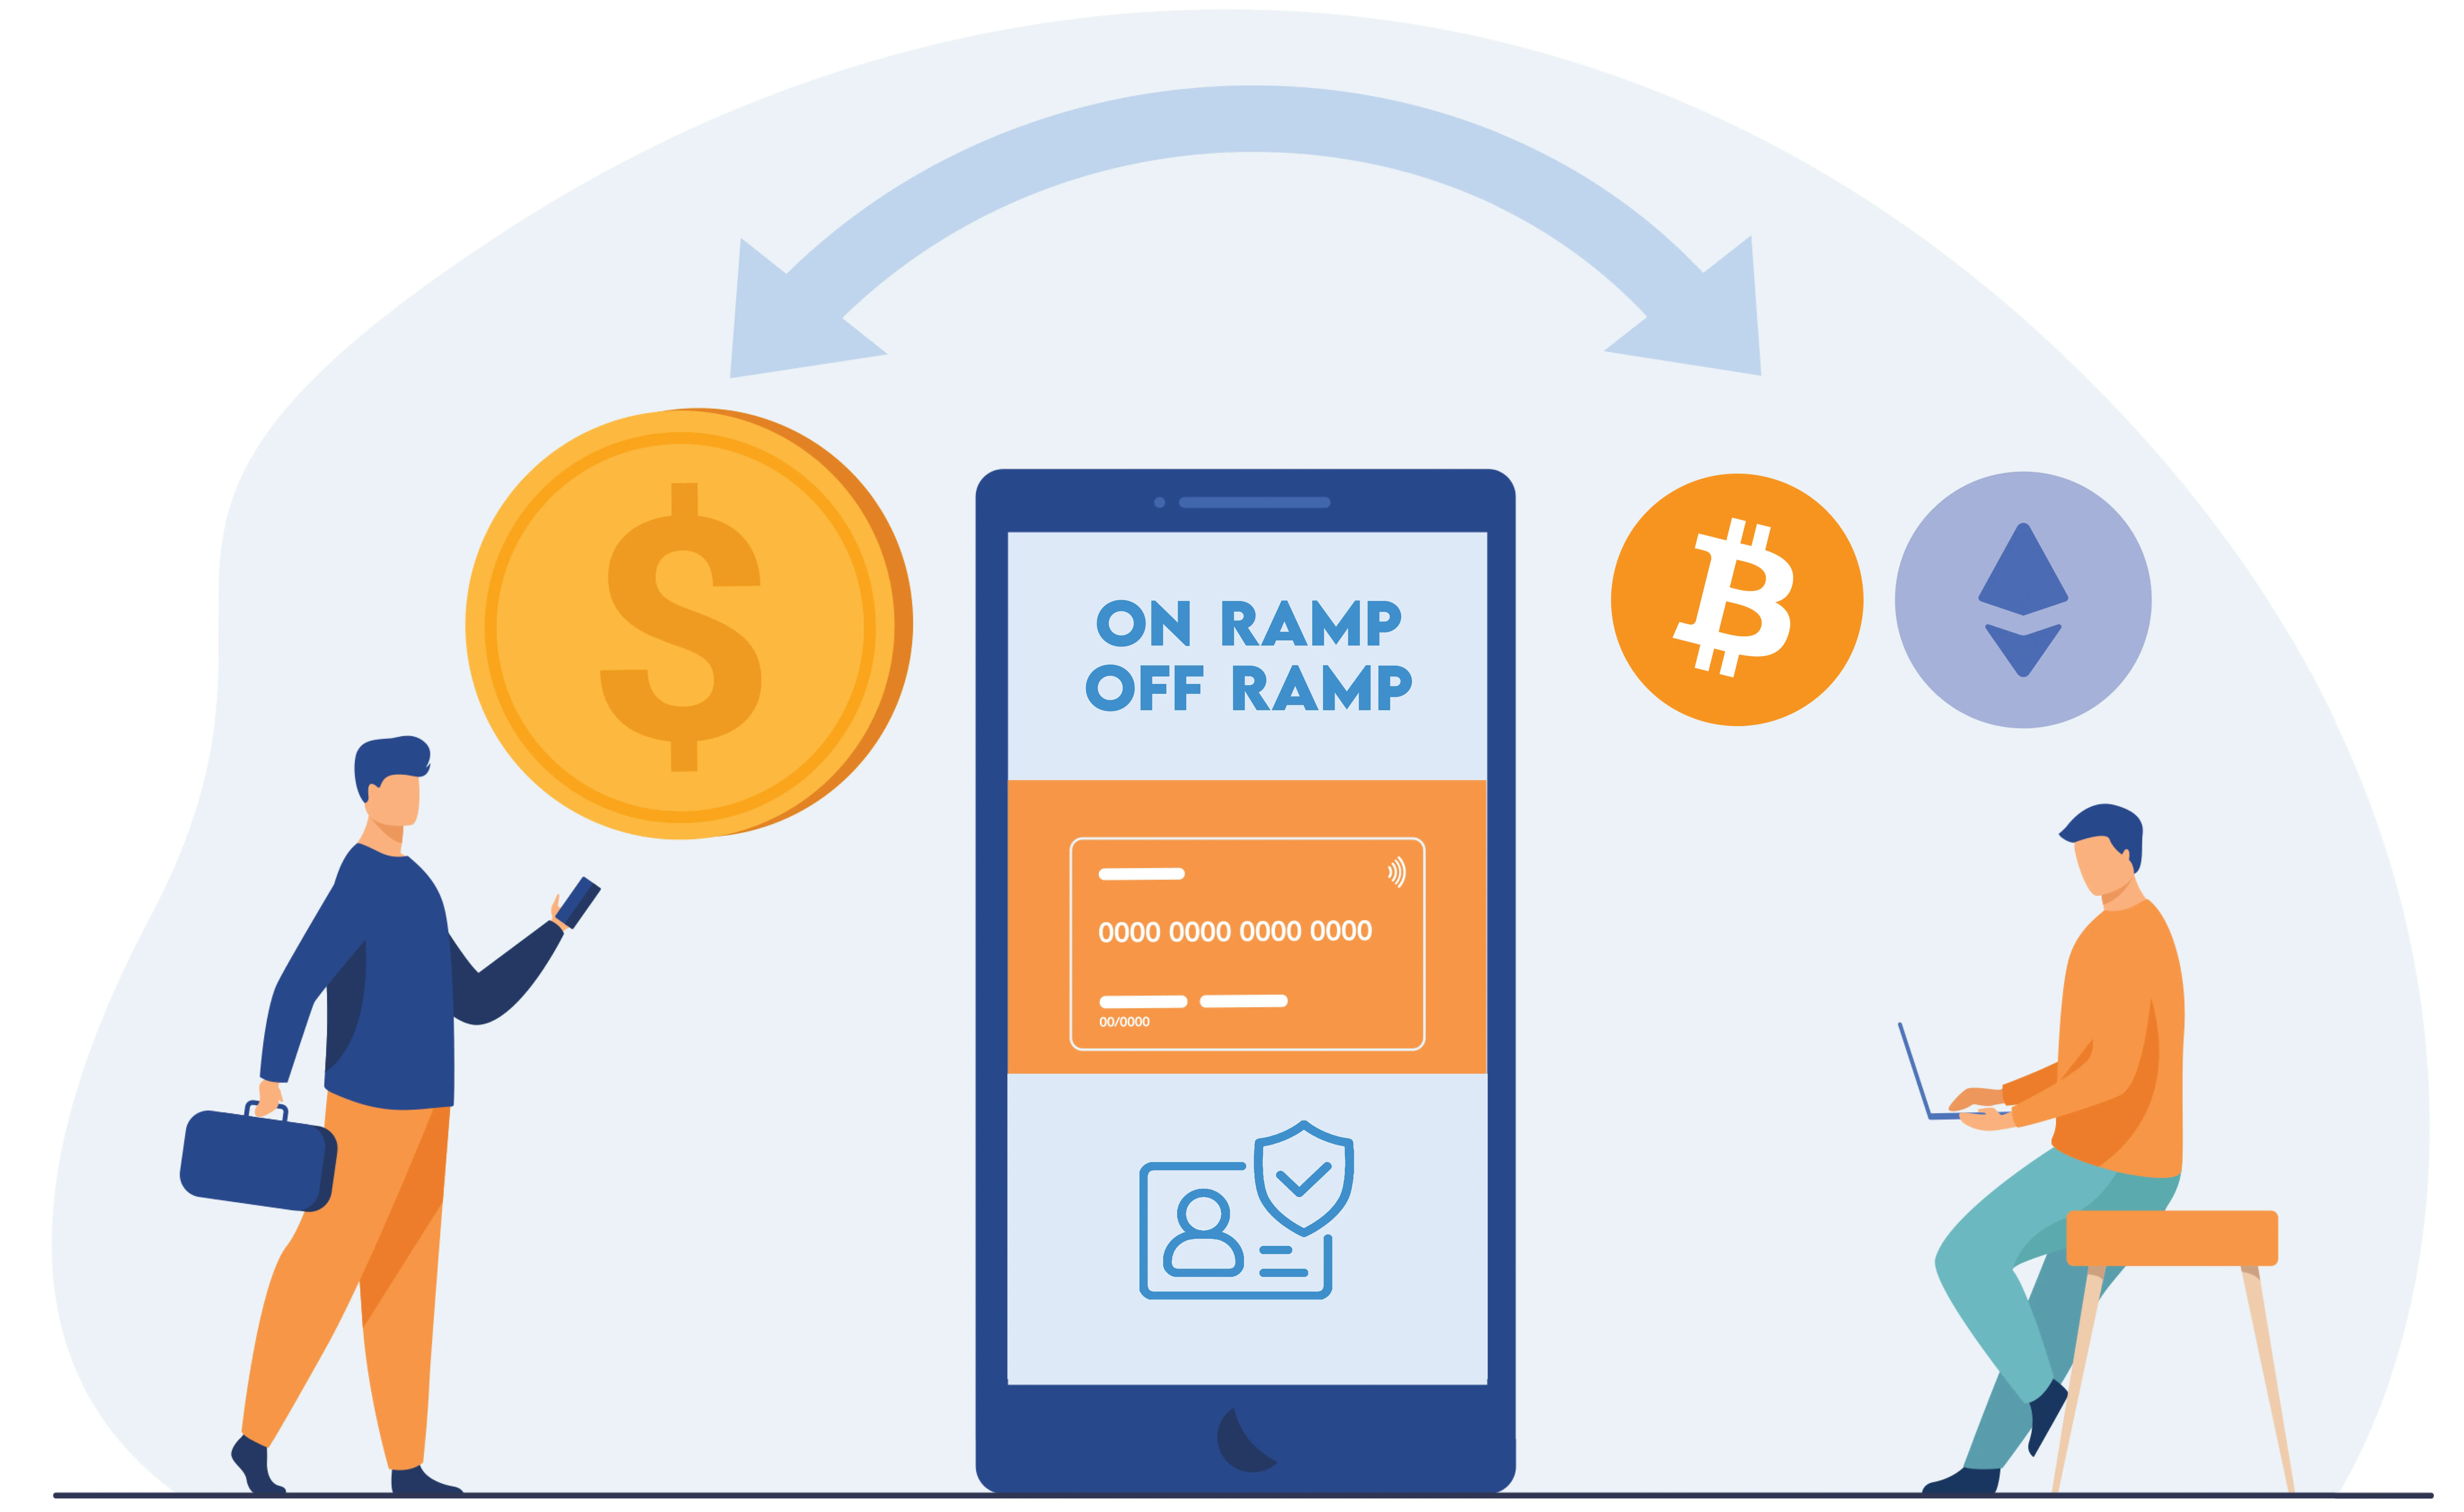 Fiat crypto on ramp off ramp infrastructure